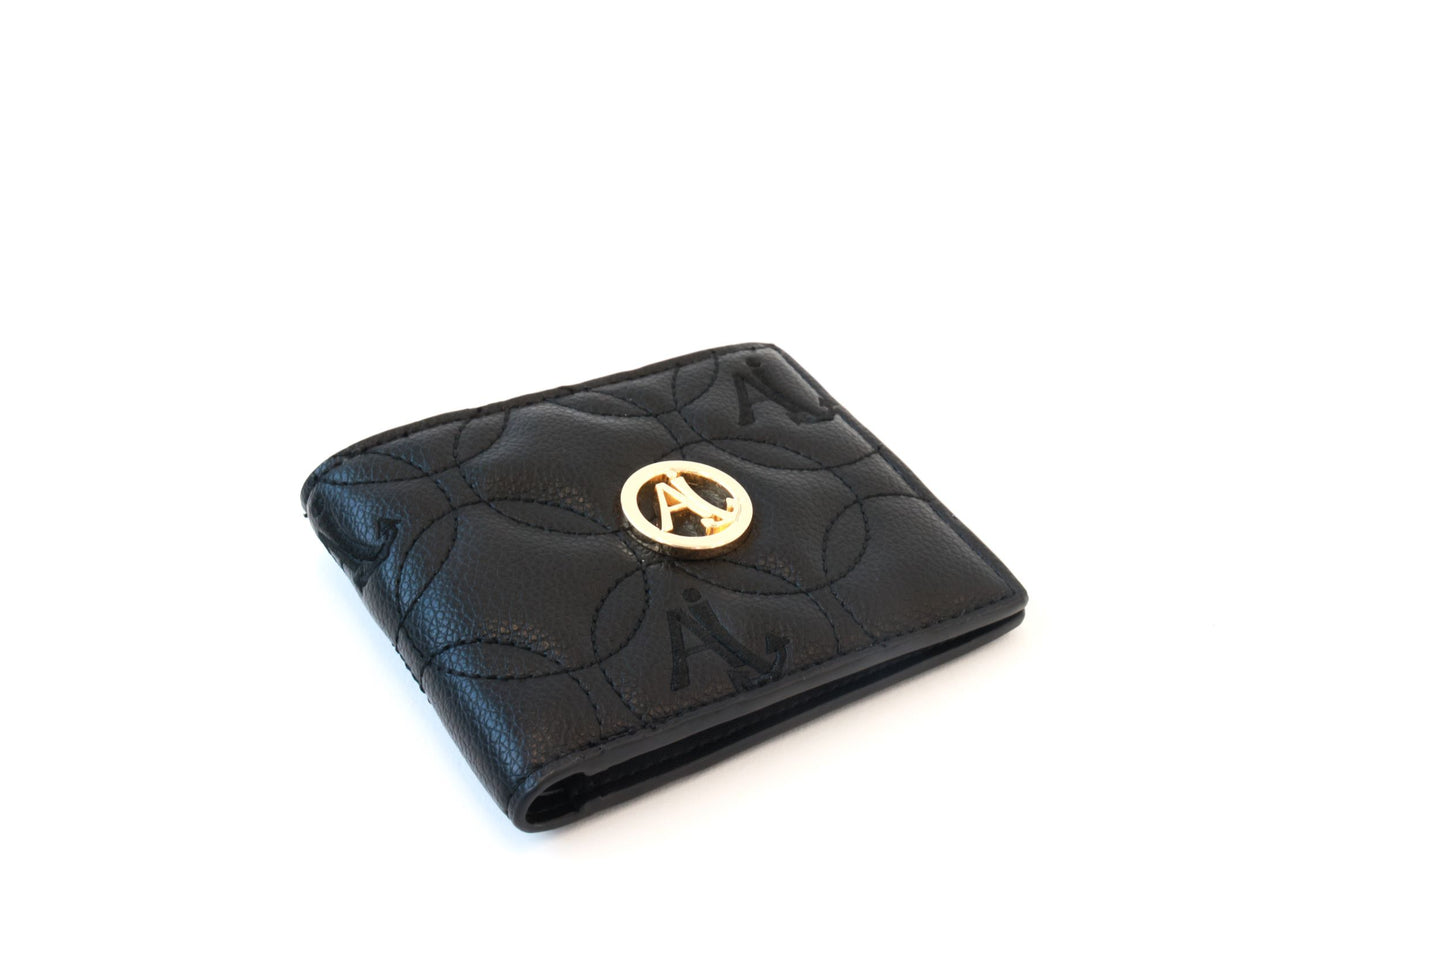 WALLET with Ai Logo pattern